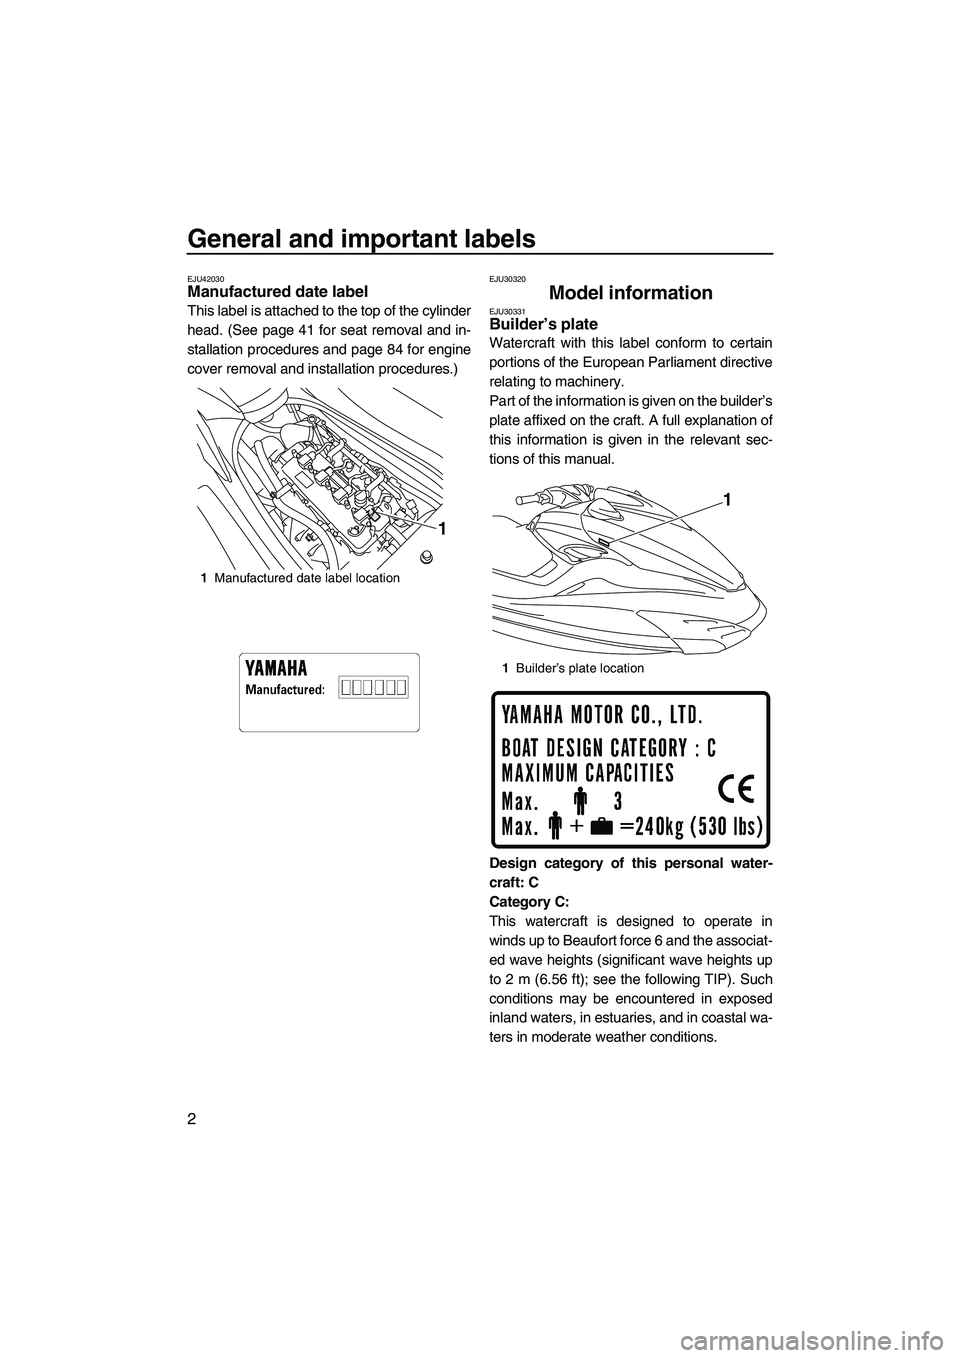 YAMAHA FZS 2013  Owners Manual General and important labels
2
EJU42030Manufactured date label 
This label is attached to the top of the cylinder
head. (See page 41 for seat removal and in-
stallation procedures and page 84 for engi